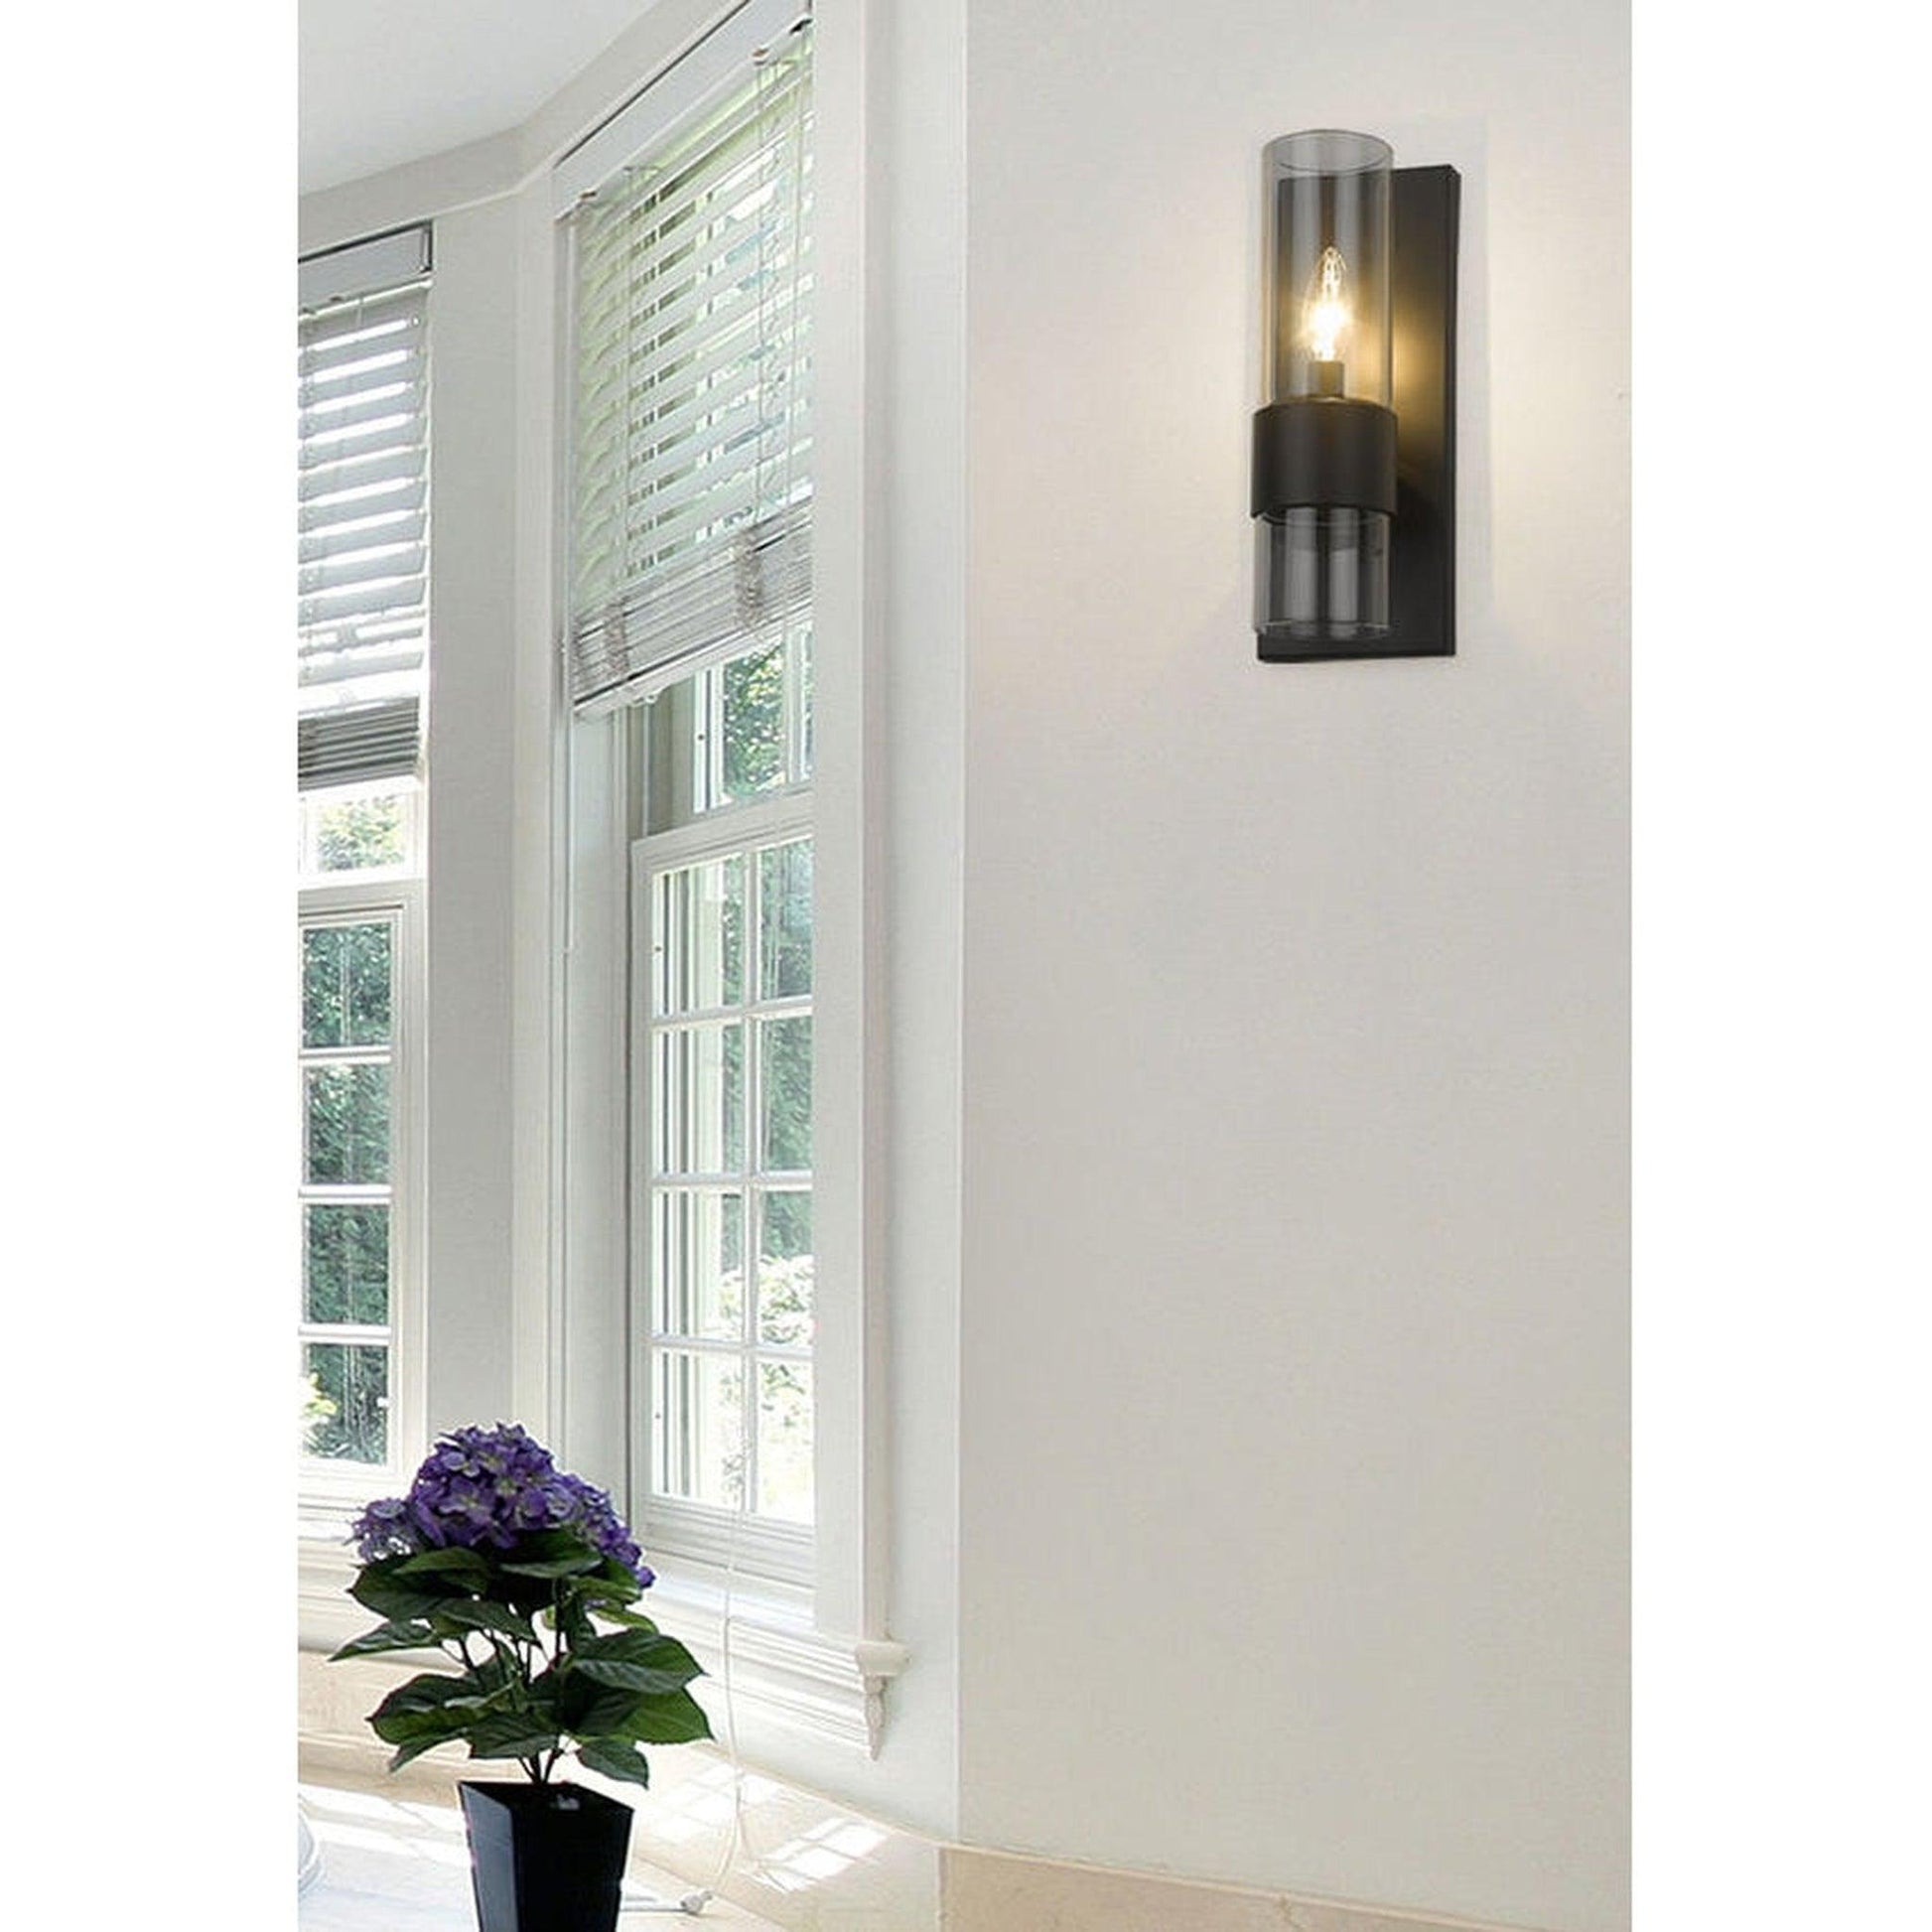 Z-Lite Lawson 5" 1-Light Matte Black Wall Sconce With Clear Glass Shade